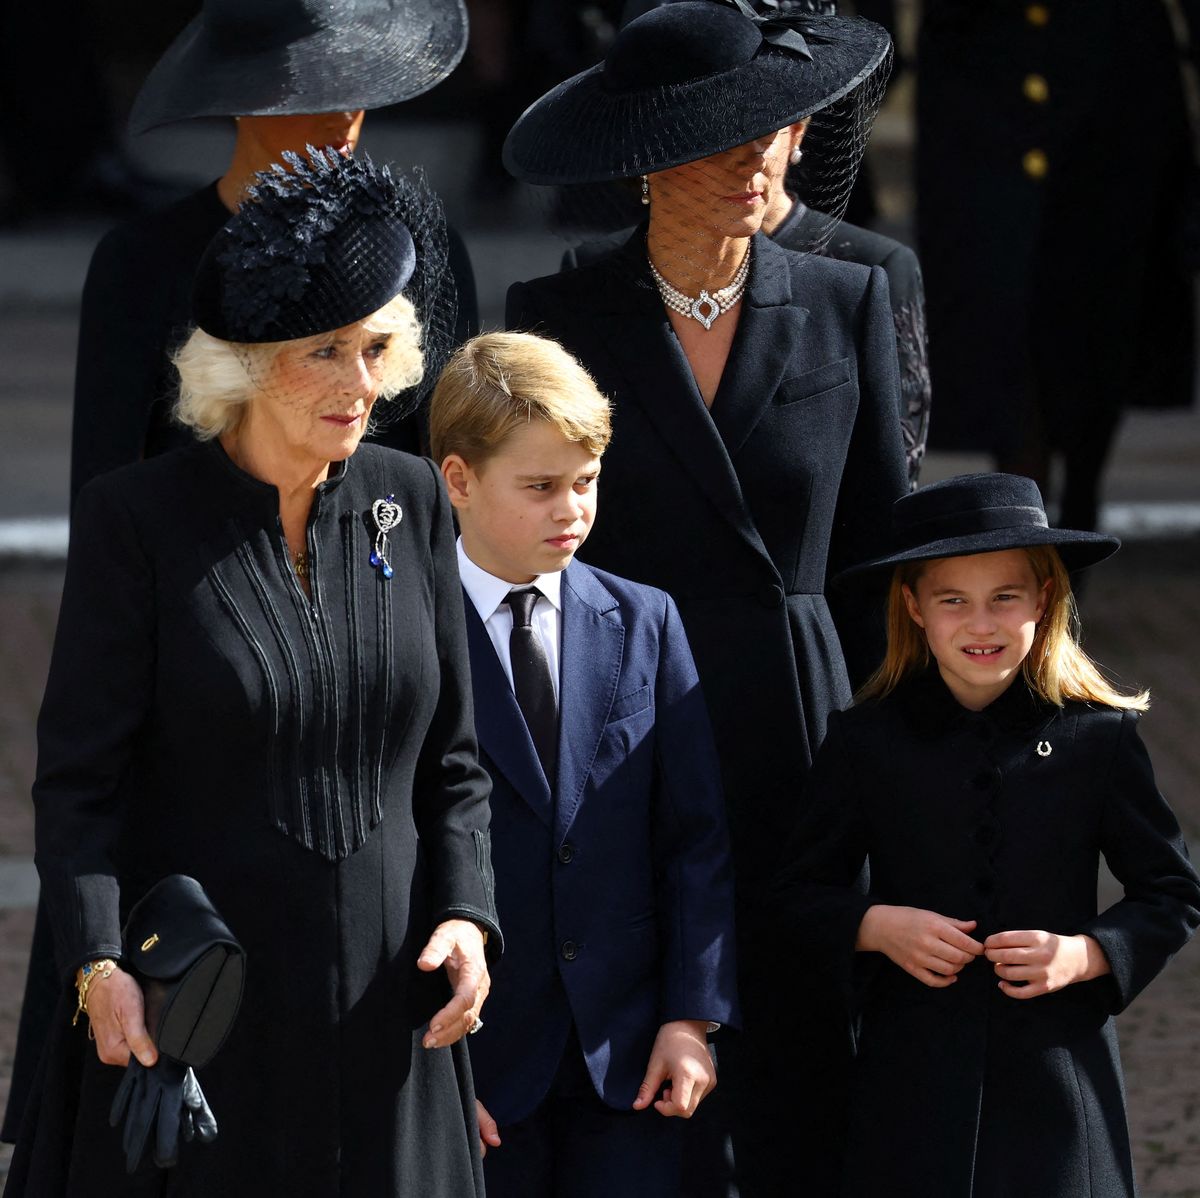 Everyone says same thing about Charlotte at the Queen's funeral